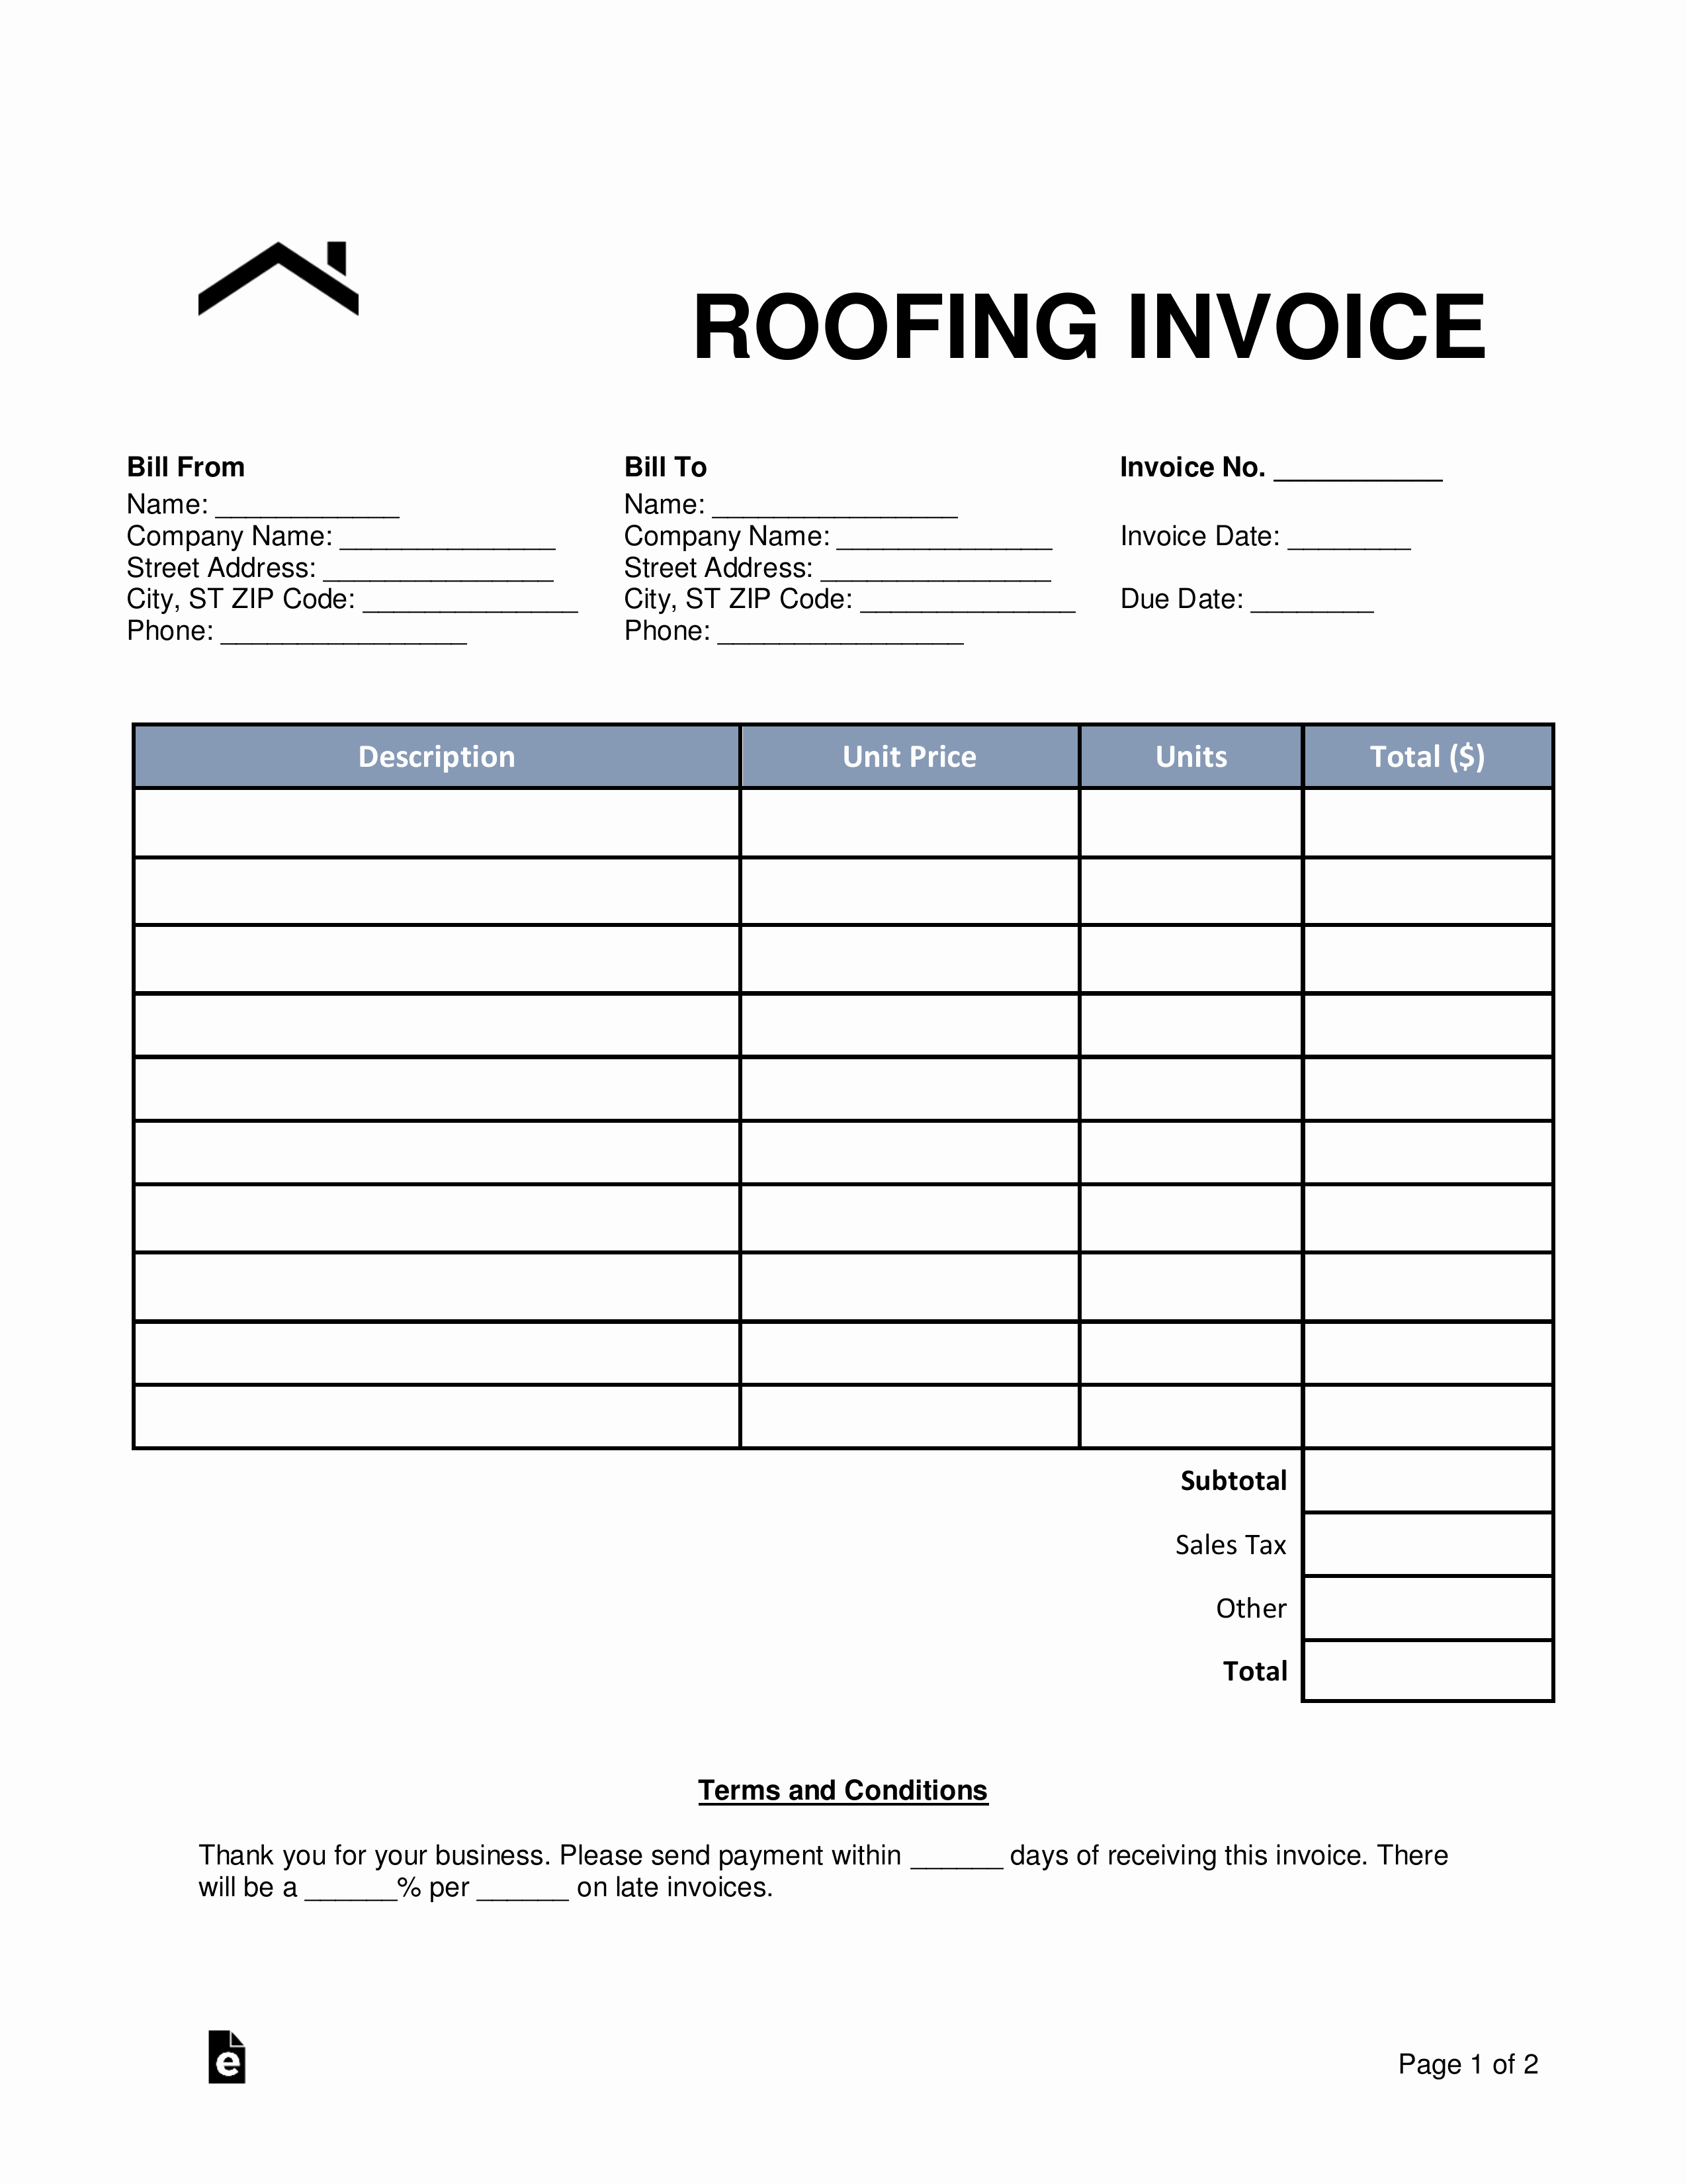 Free Roofing Estimate Template Elegant Free Roofing Invoice Template Word Pdf